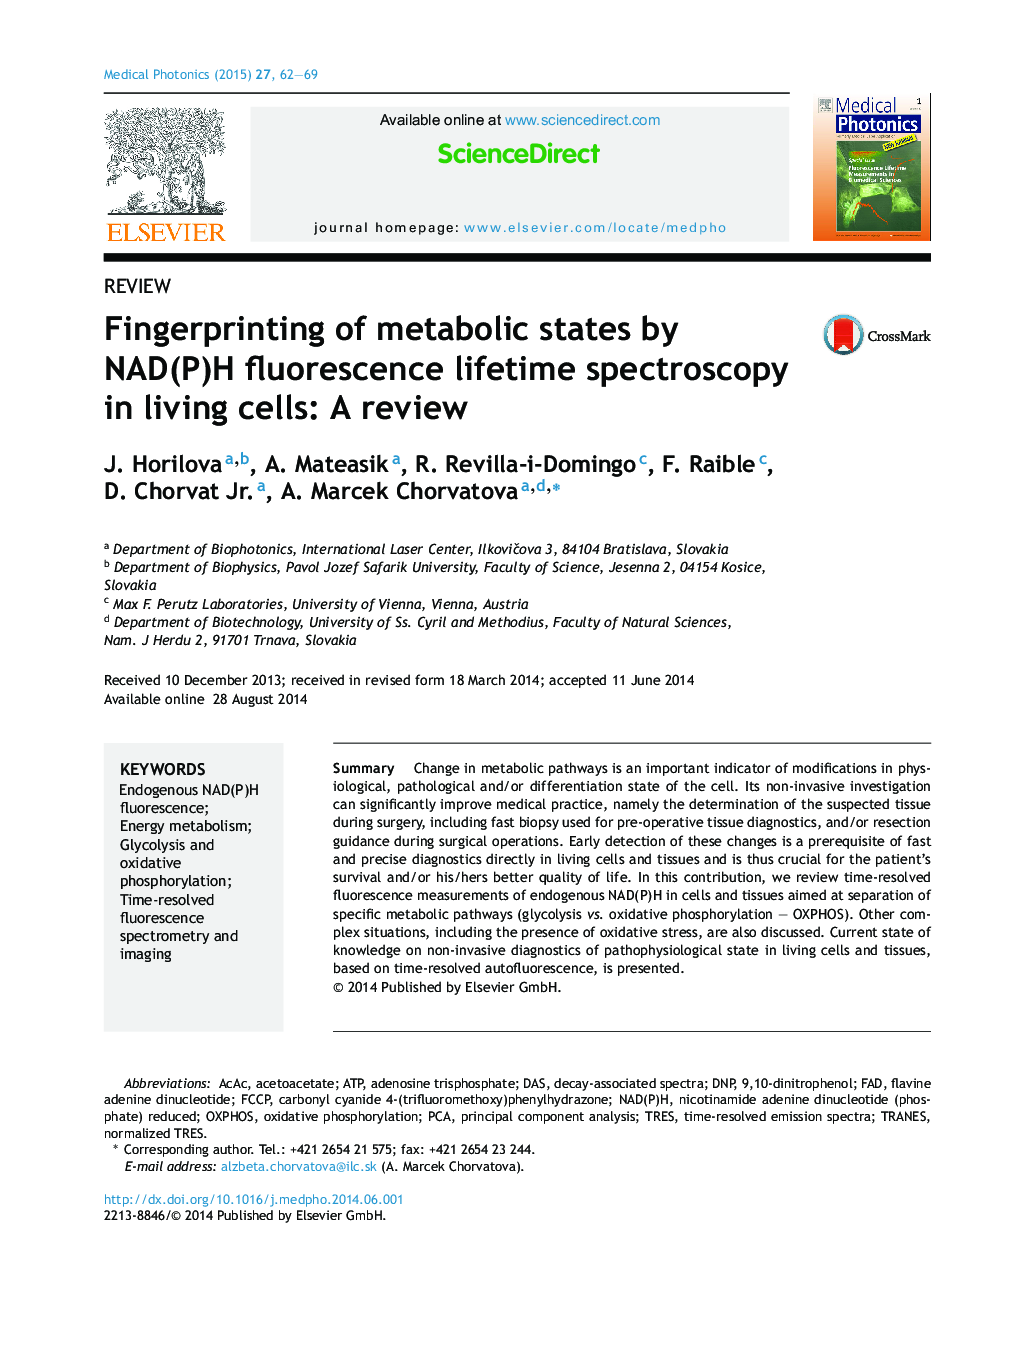 Fingerprinting of metabolic states by NAD(P)H fluorescence lifetime spectroscopy in living cells: A review